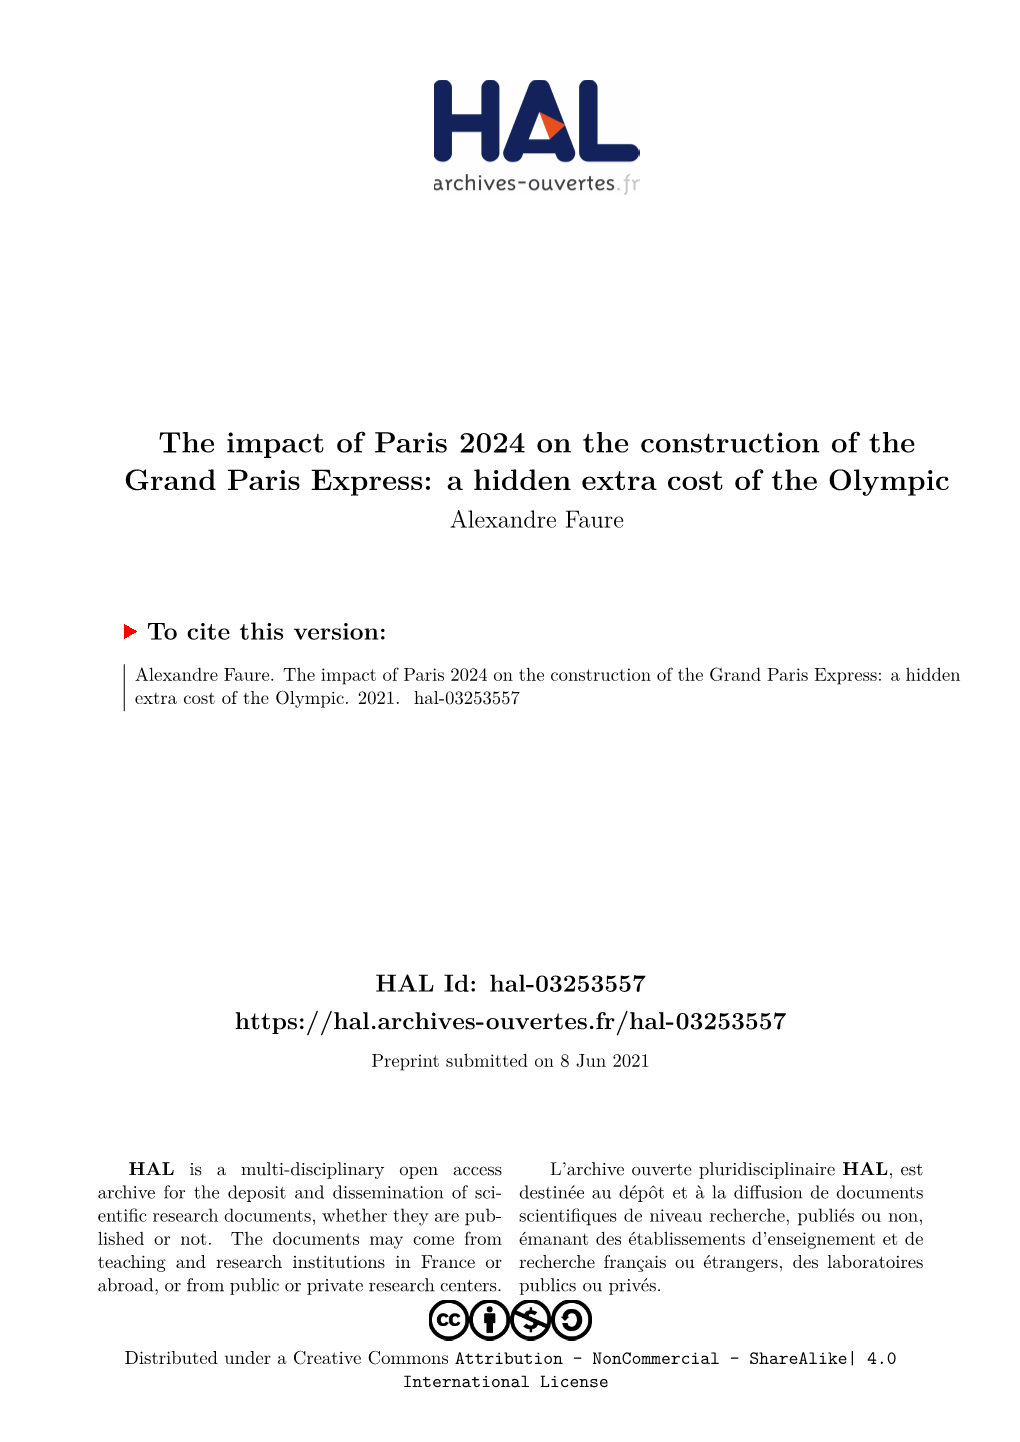 The Impact of Paris 2024 on the Construction of the Grand Paris Express: a Hidden Extra Cost of the Olympic Alexandre Faure